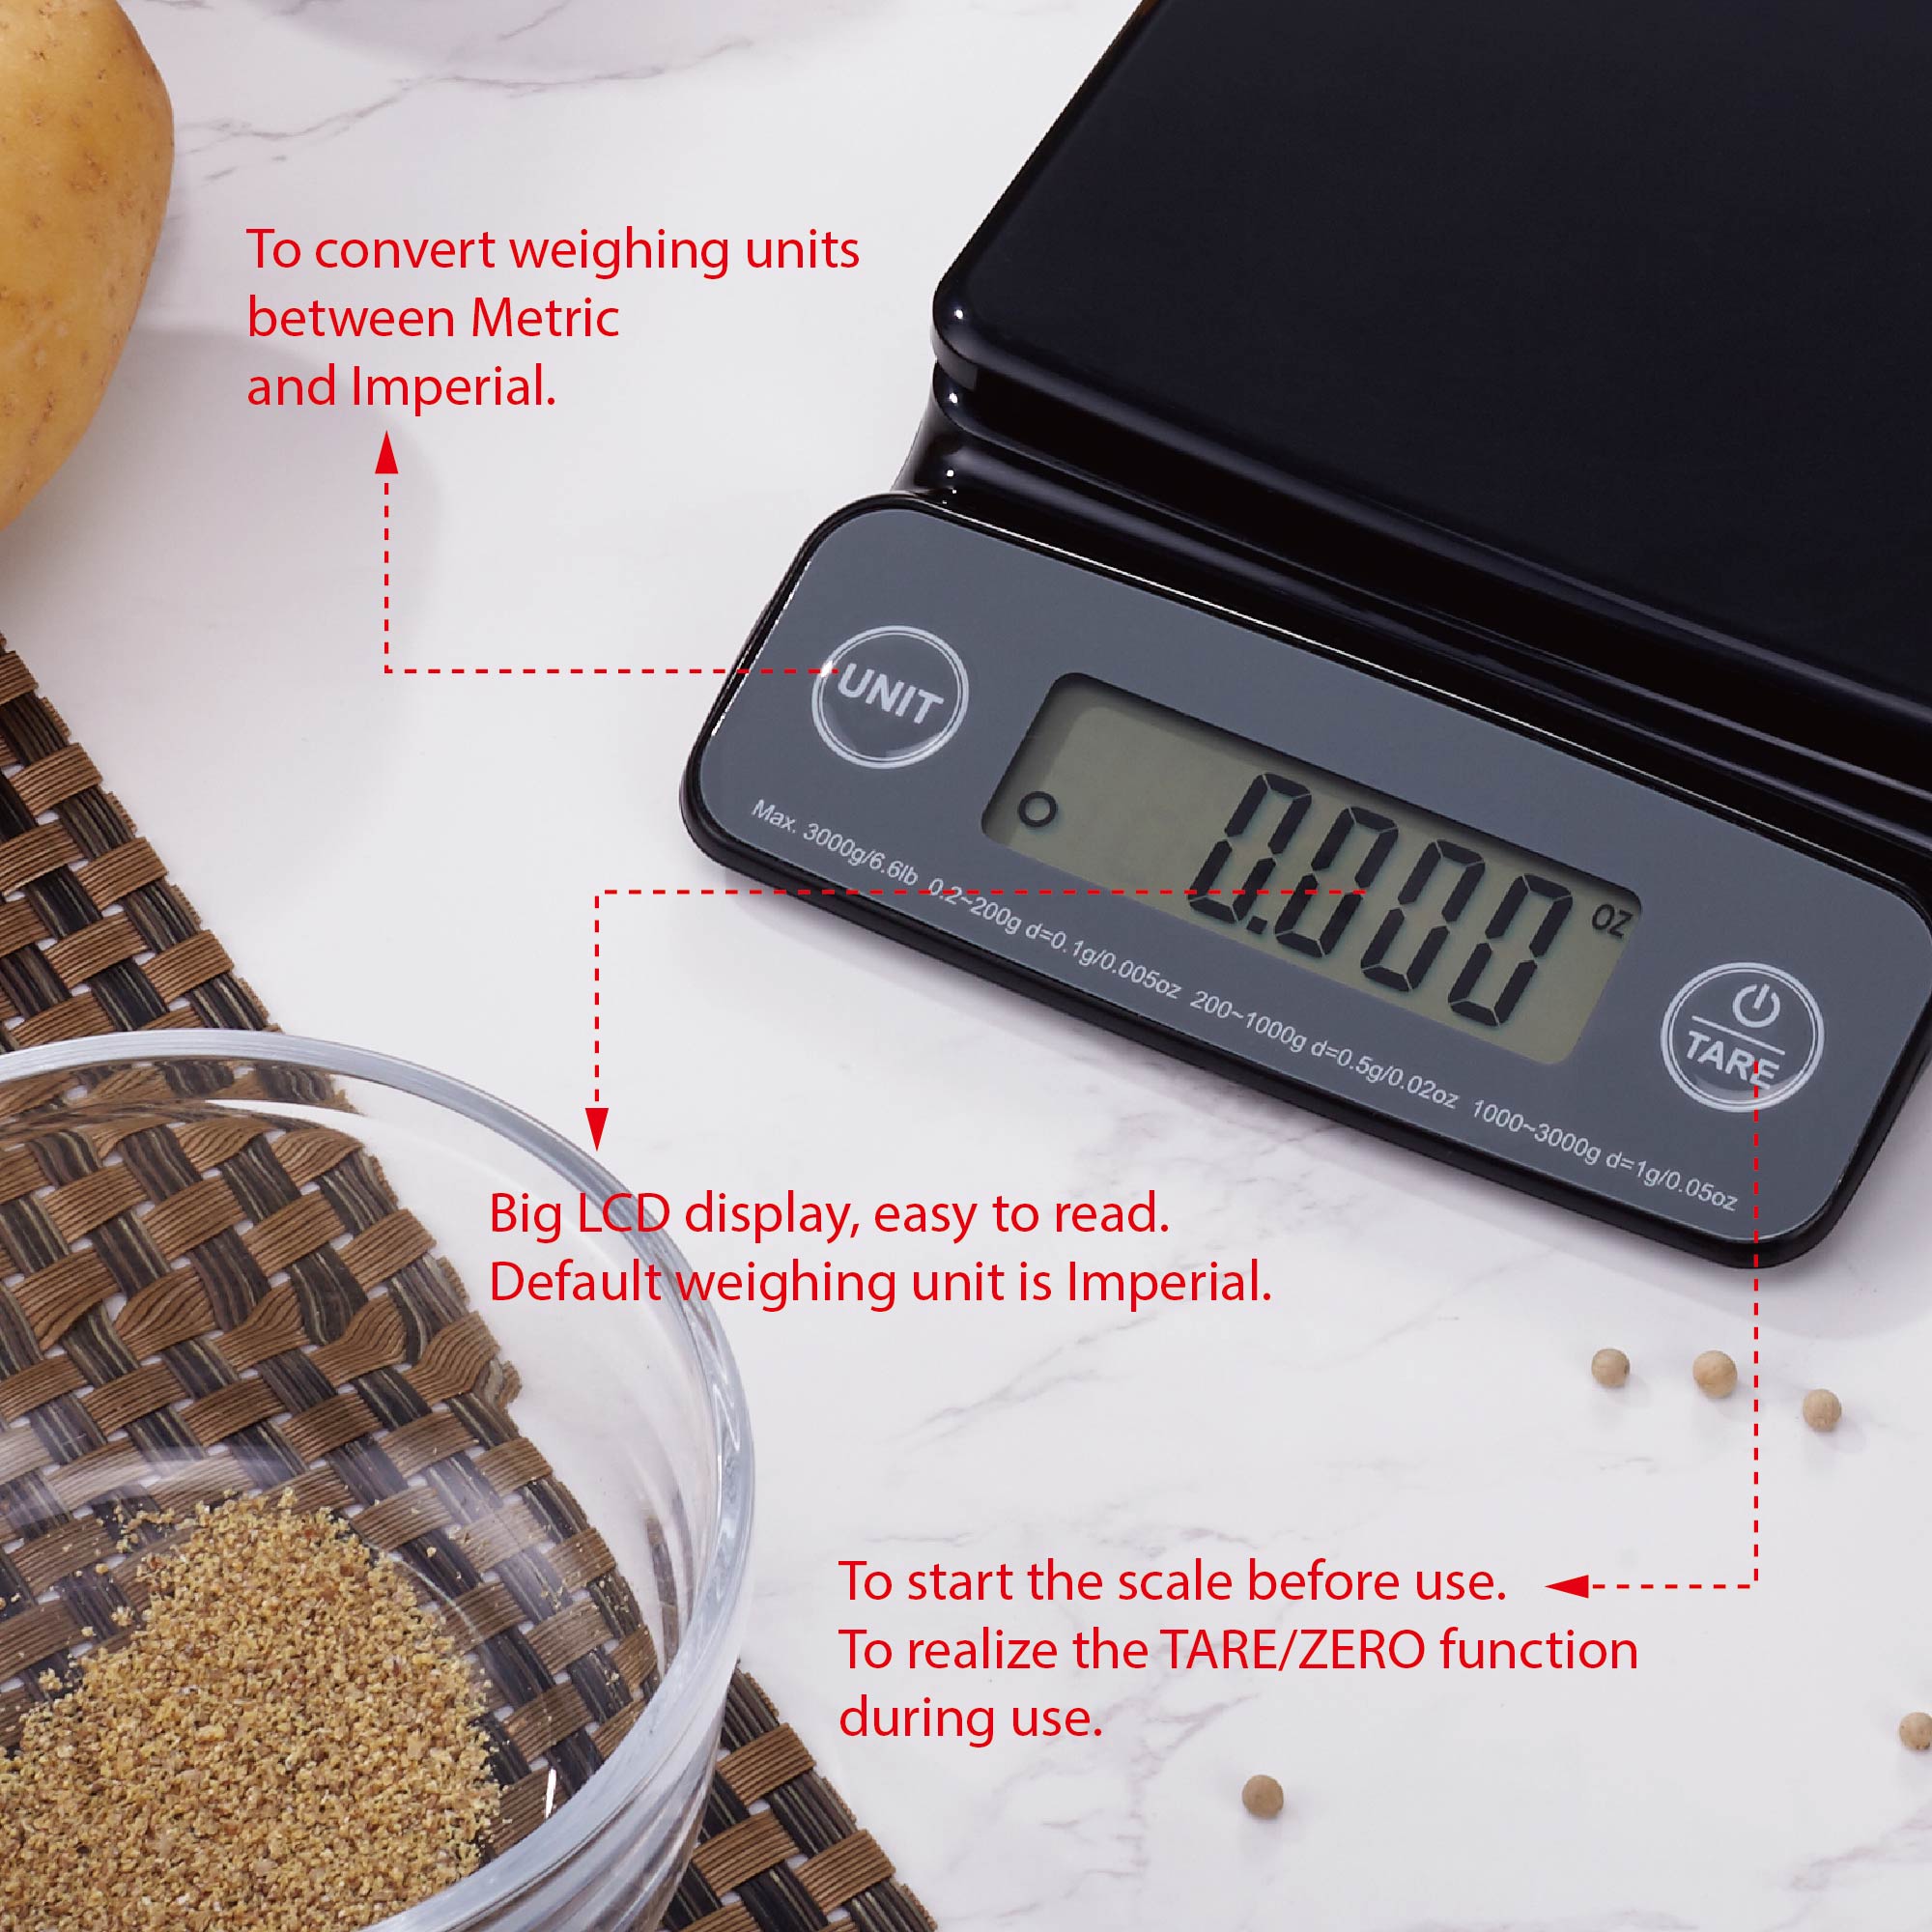 Mainstays High Precision Digital Kitchen Scale, Black - image 5 of 12